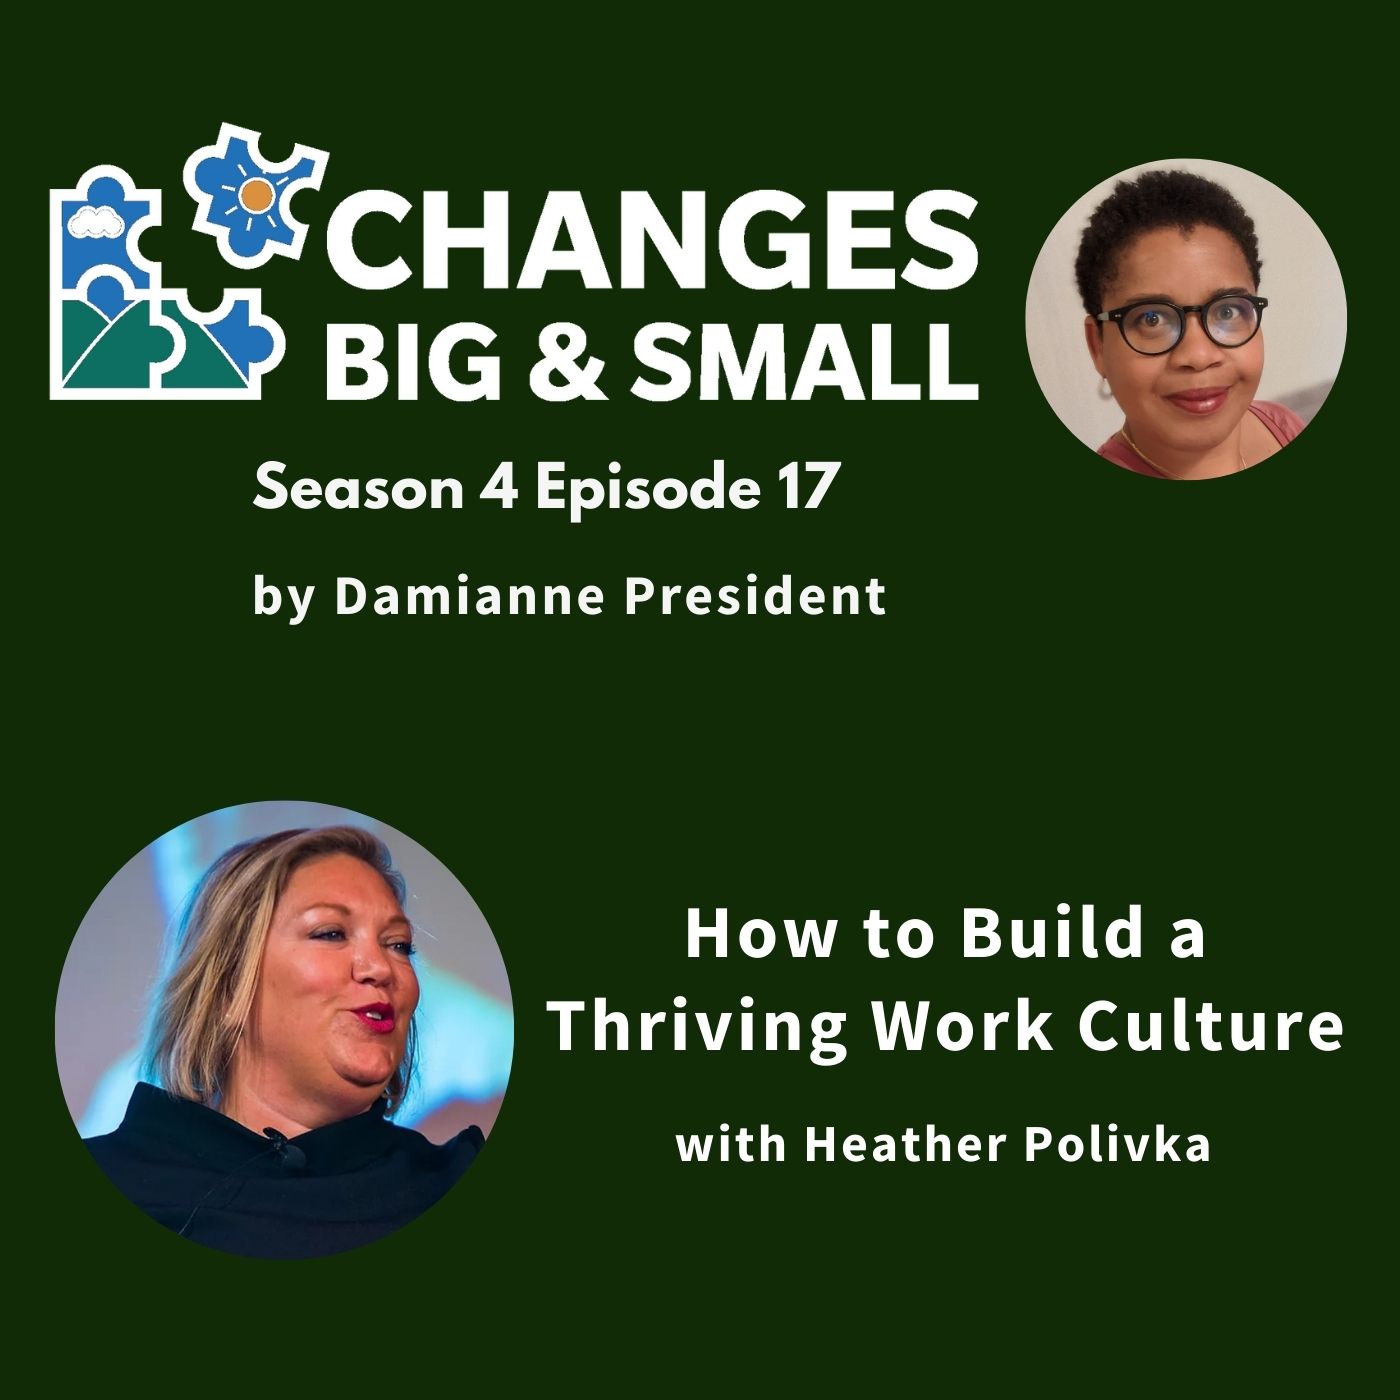 How to Build a Thriving Work Culture